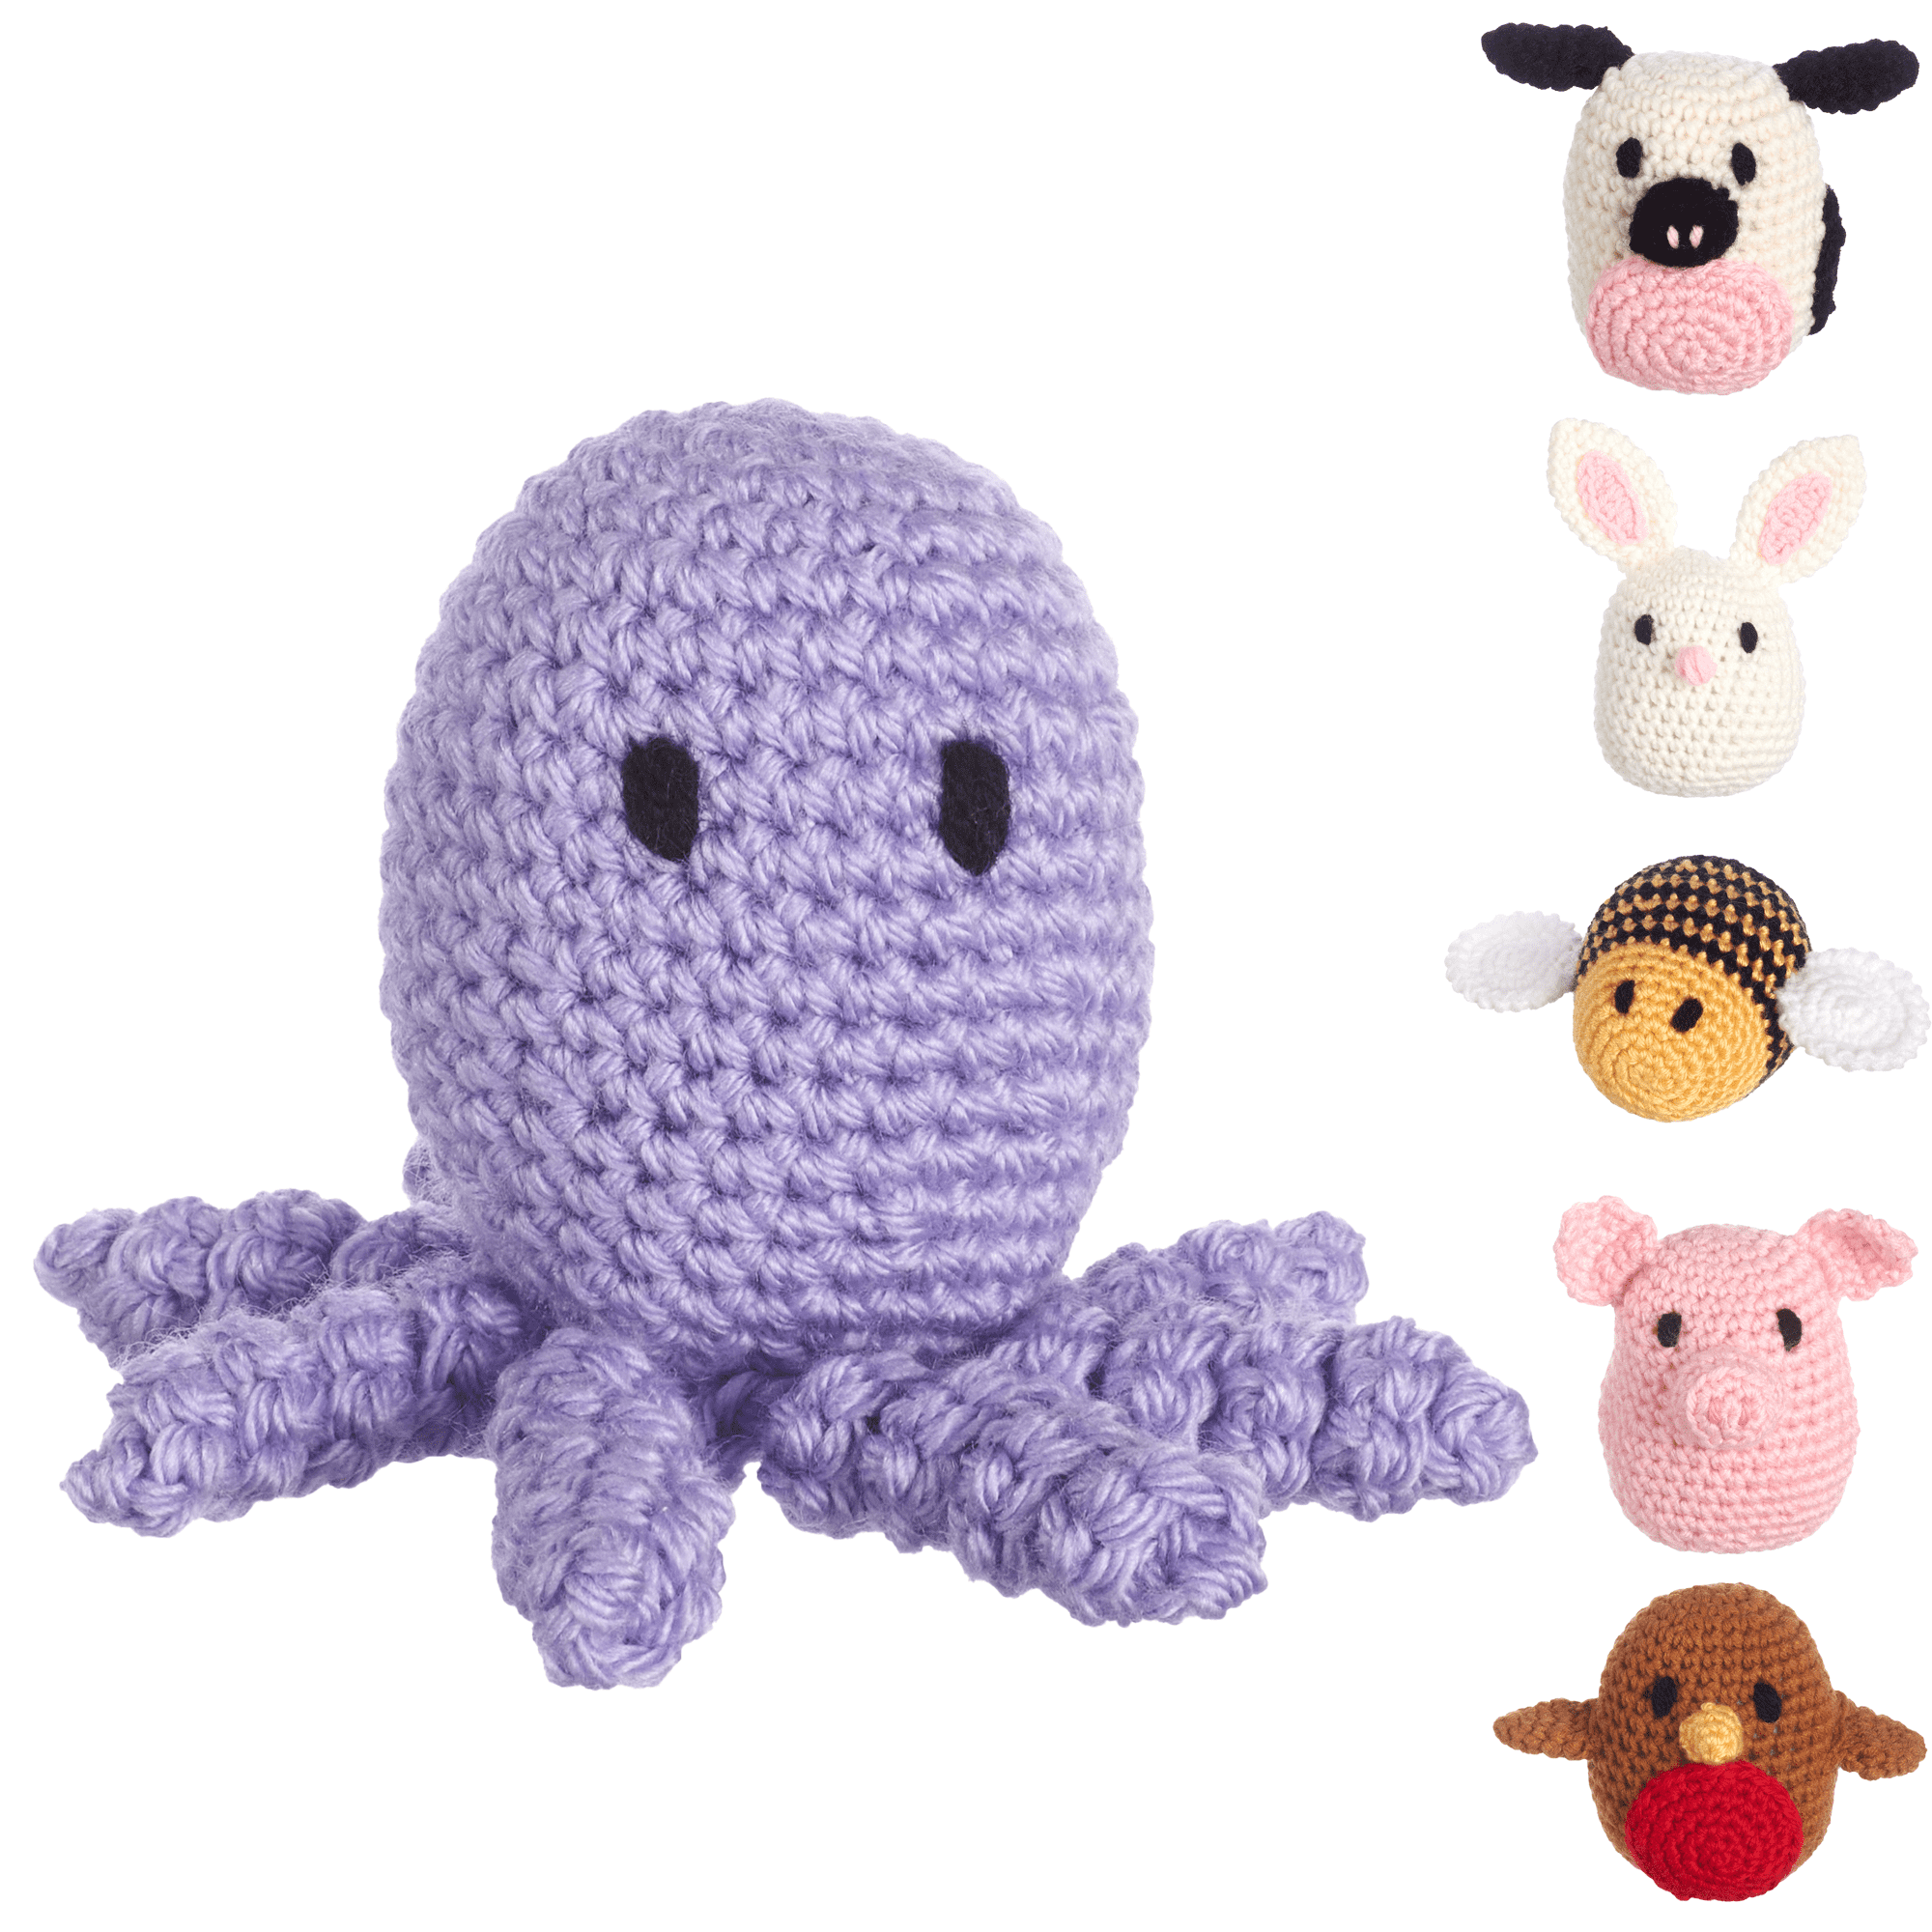 Crochet Kit for Beginners Adults and Kids, Little Mermaid Crab Octopus  Whale, Crochet Set with Yarn and Hook Starter Kit with Step-by-Step Video